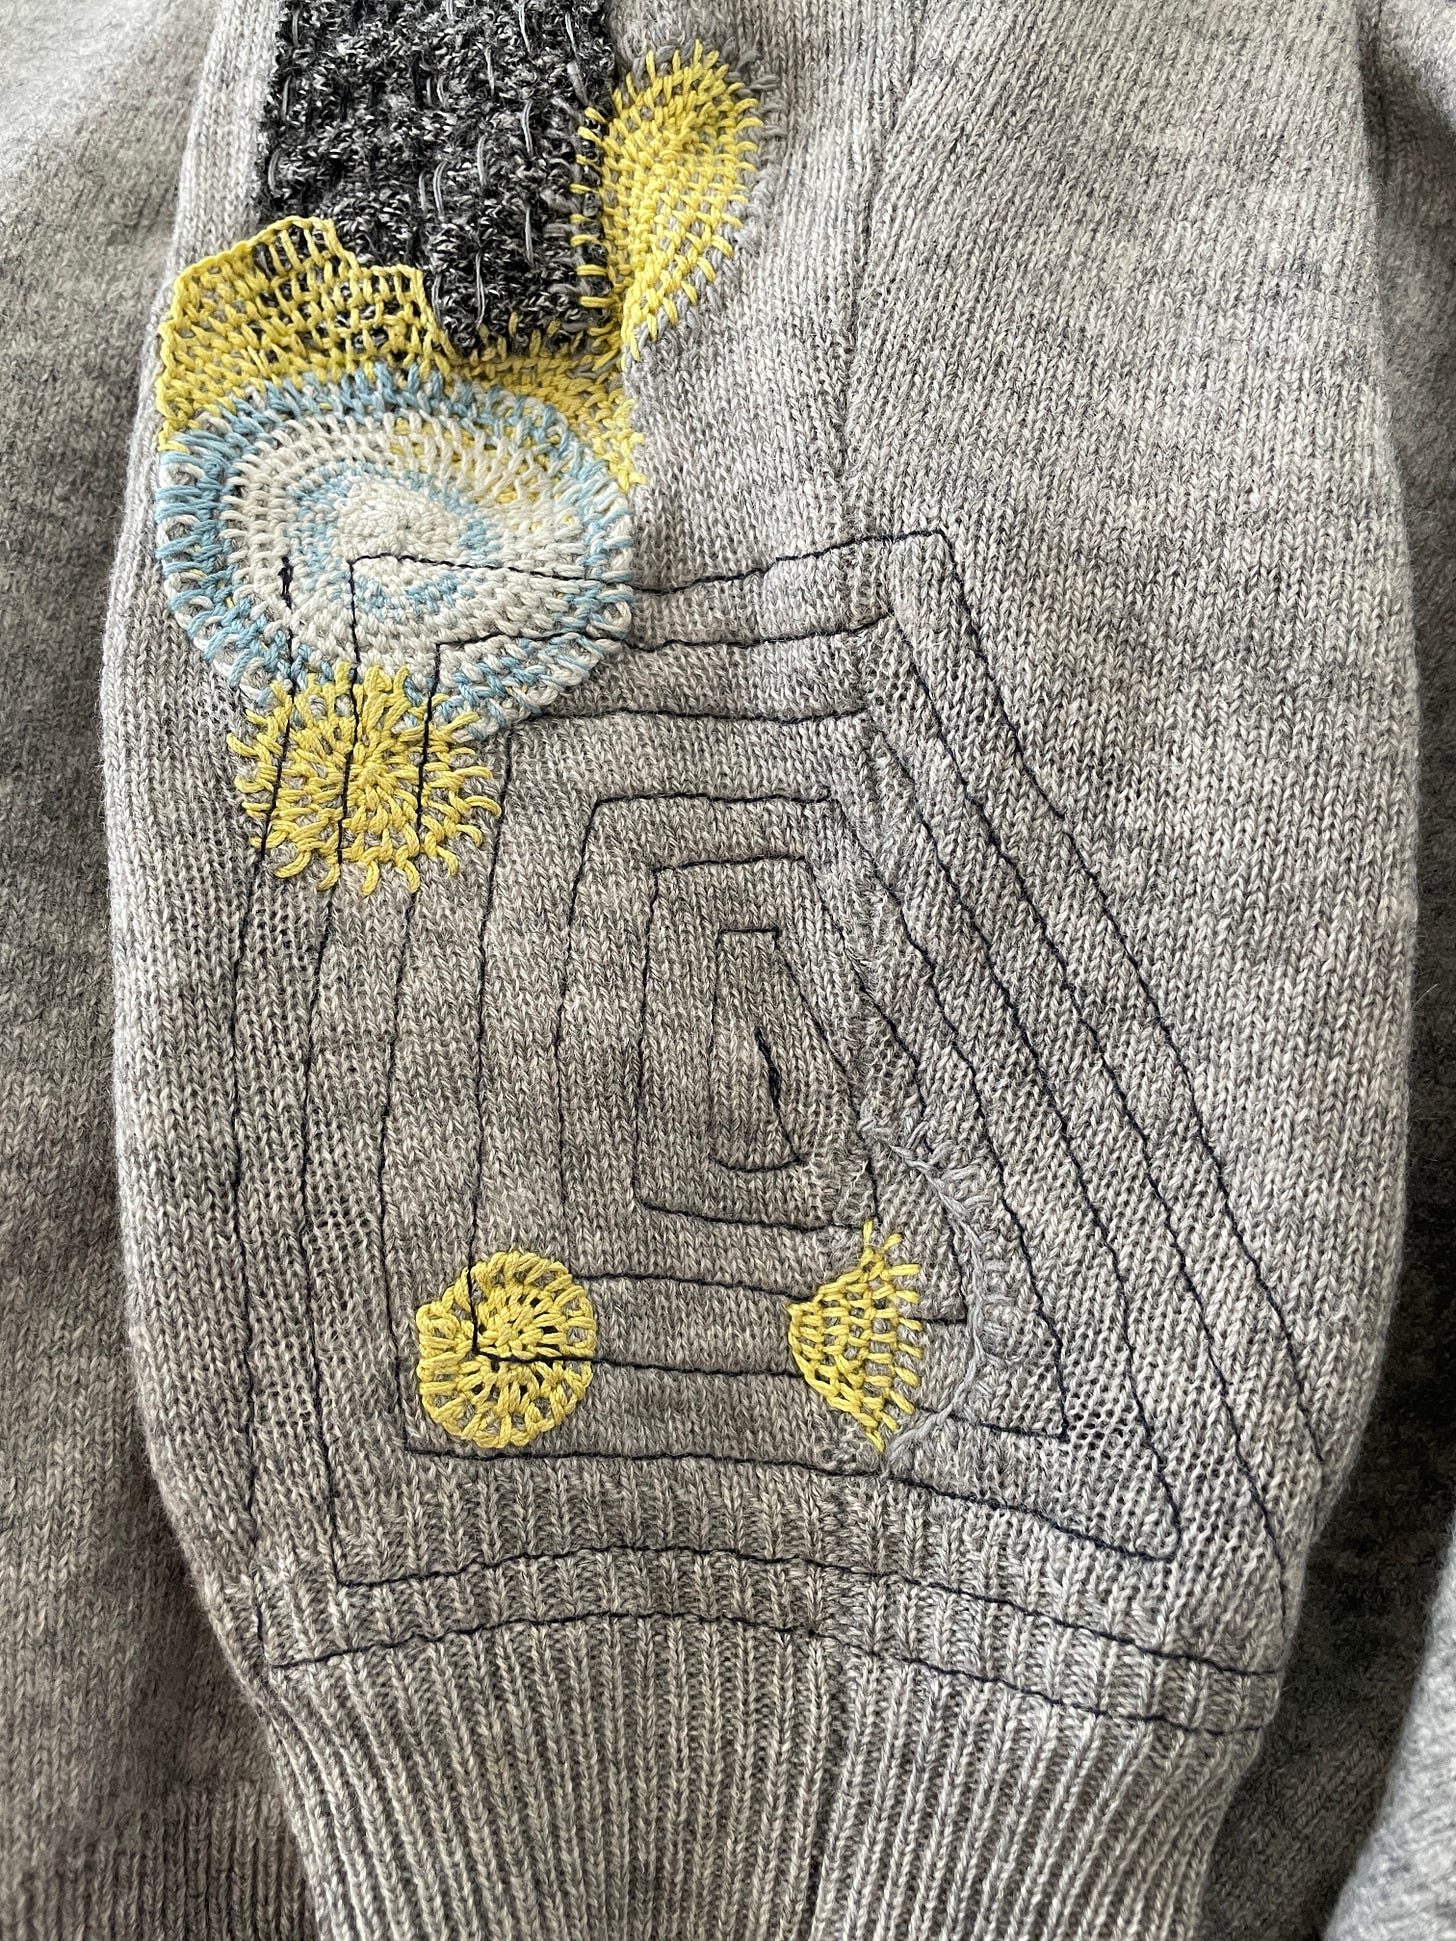 Sleeve of a gray cashmere sweater. It's visually mended with appliques, blanket hand stitches, and machine stitches.